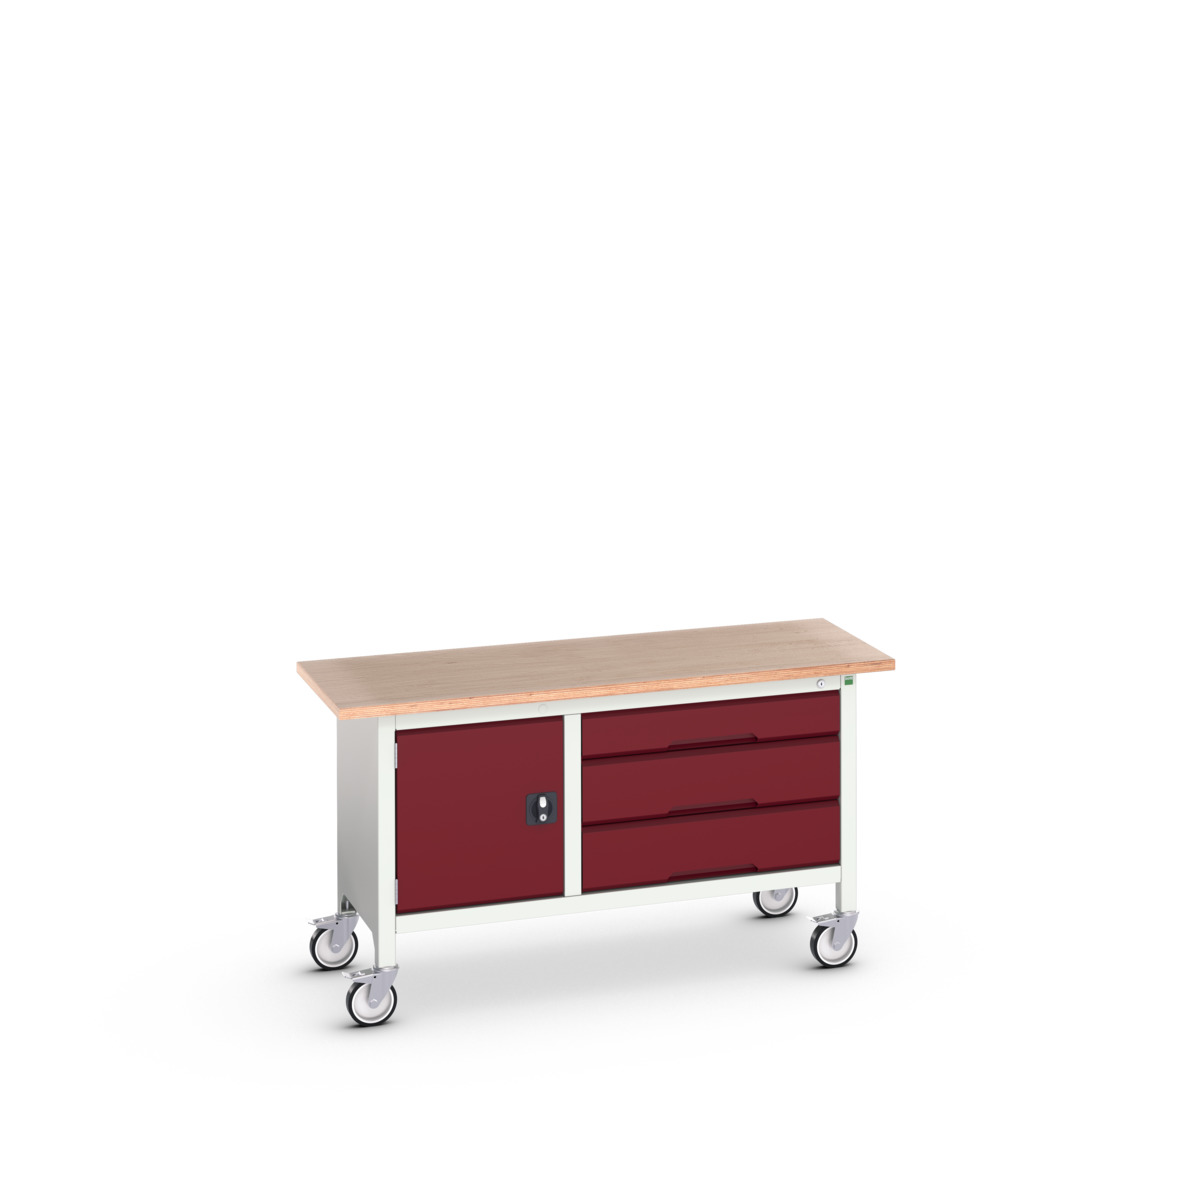 16923214.24 - verso mobile storage bench (mpx)